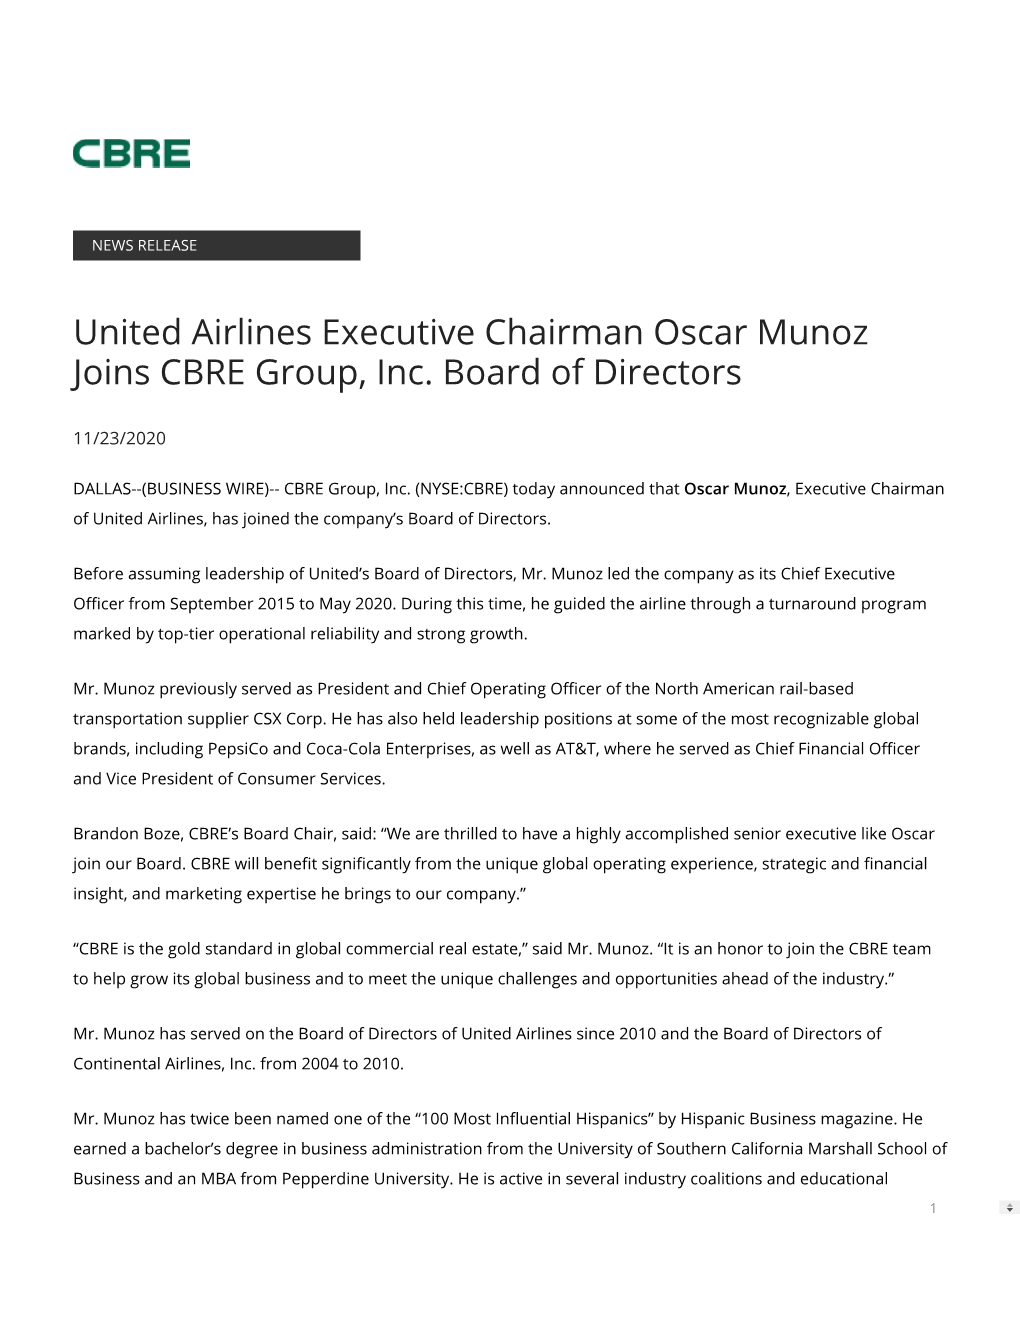 United Airlines Executive Chairman Oscar Munoz Joins CBRE Group, Inc